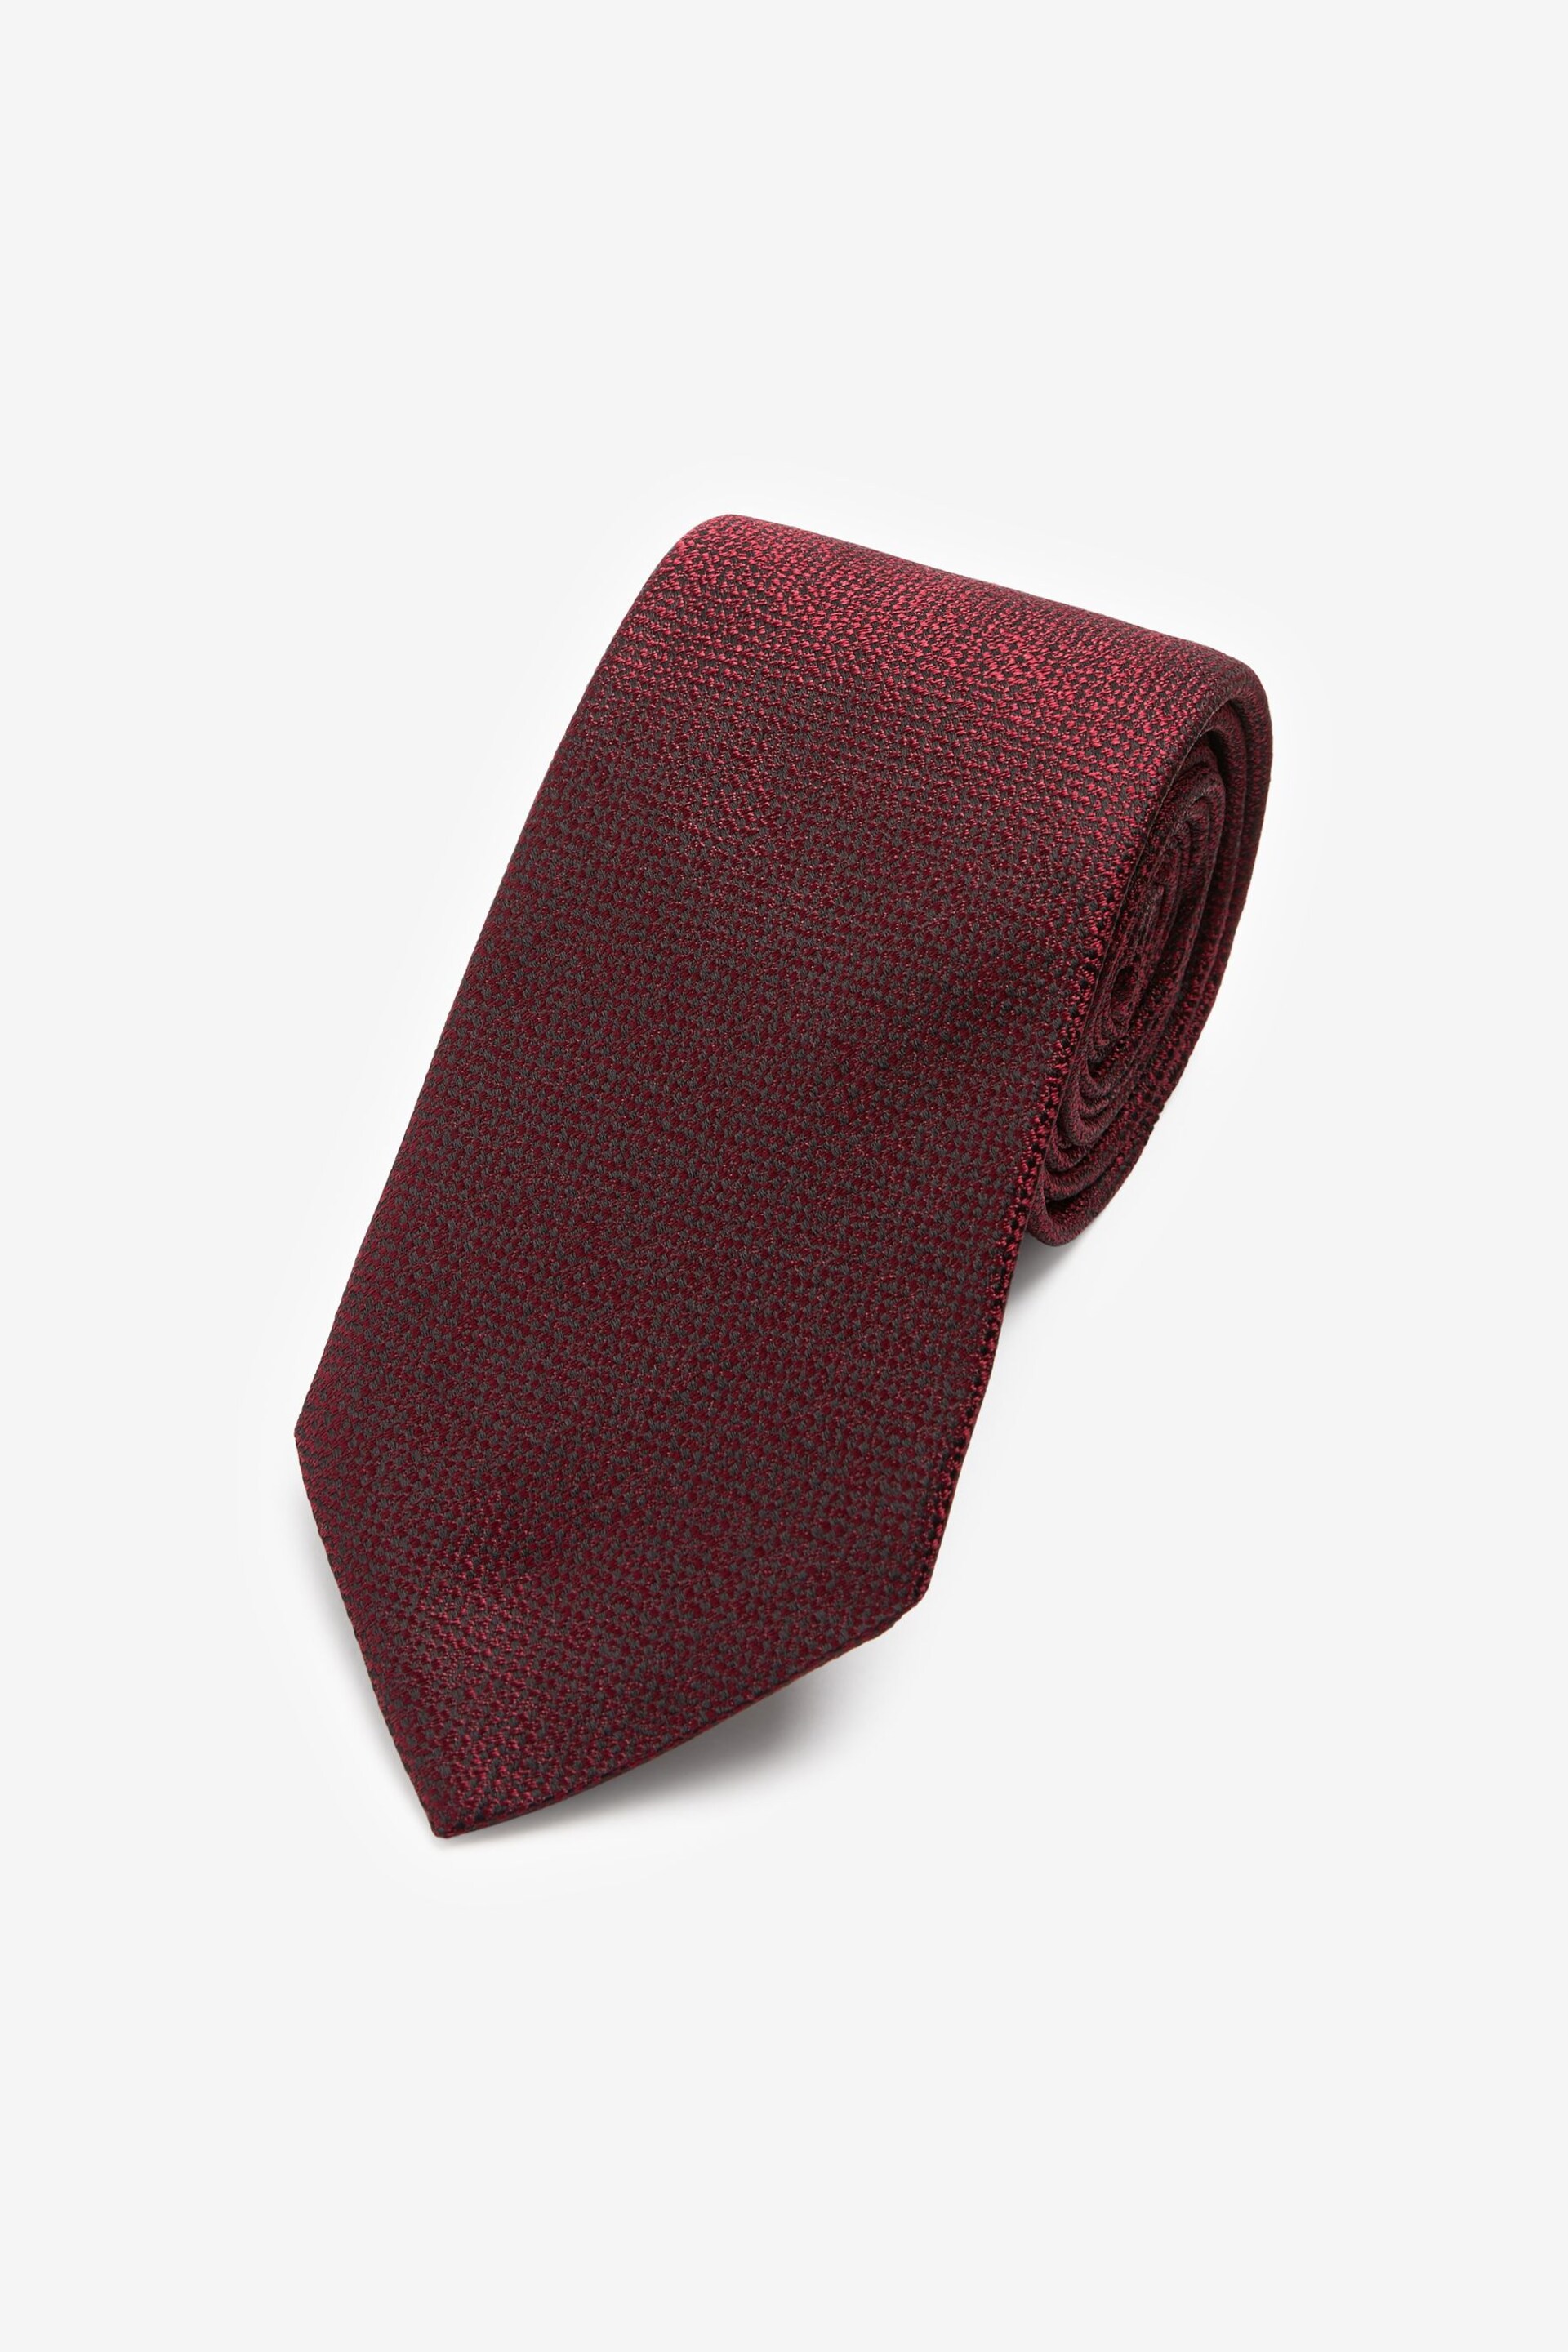 Burgundy Red Signature Made In Italy Tie - Image 1 of 3